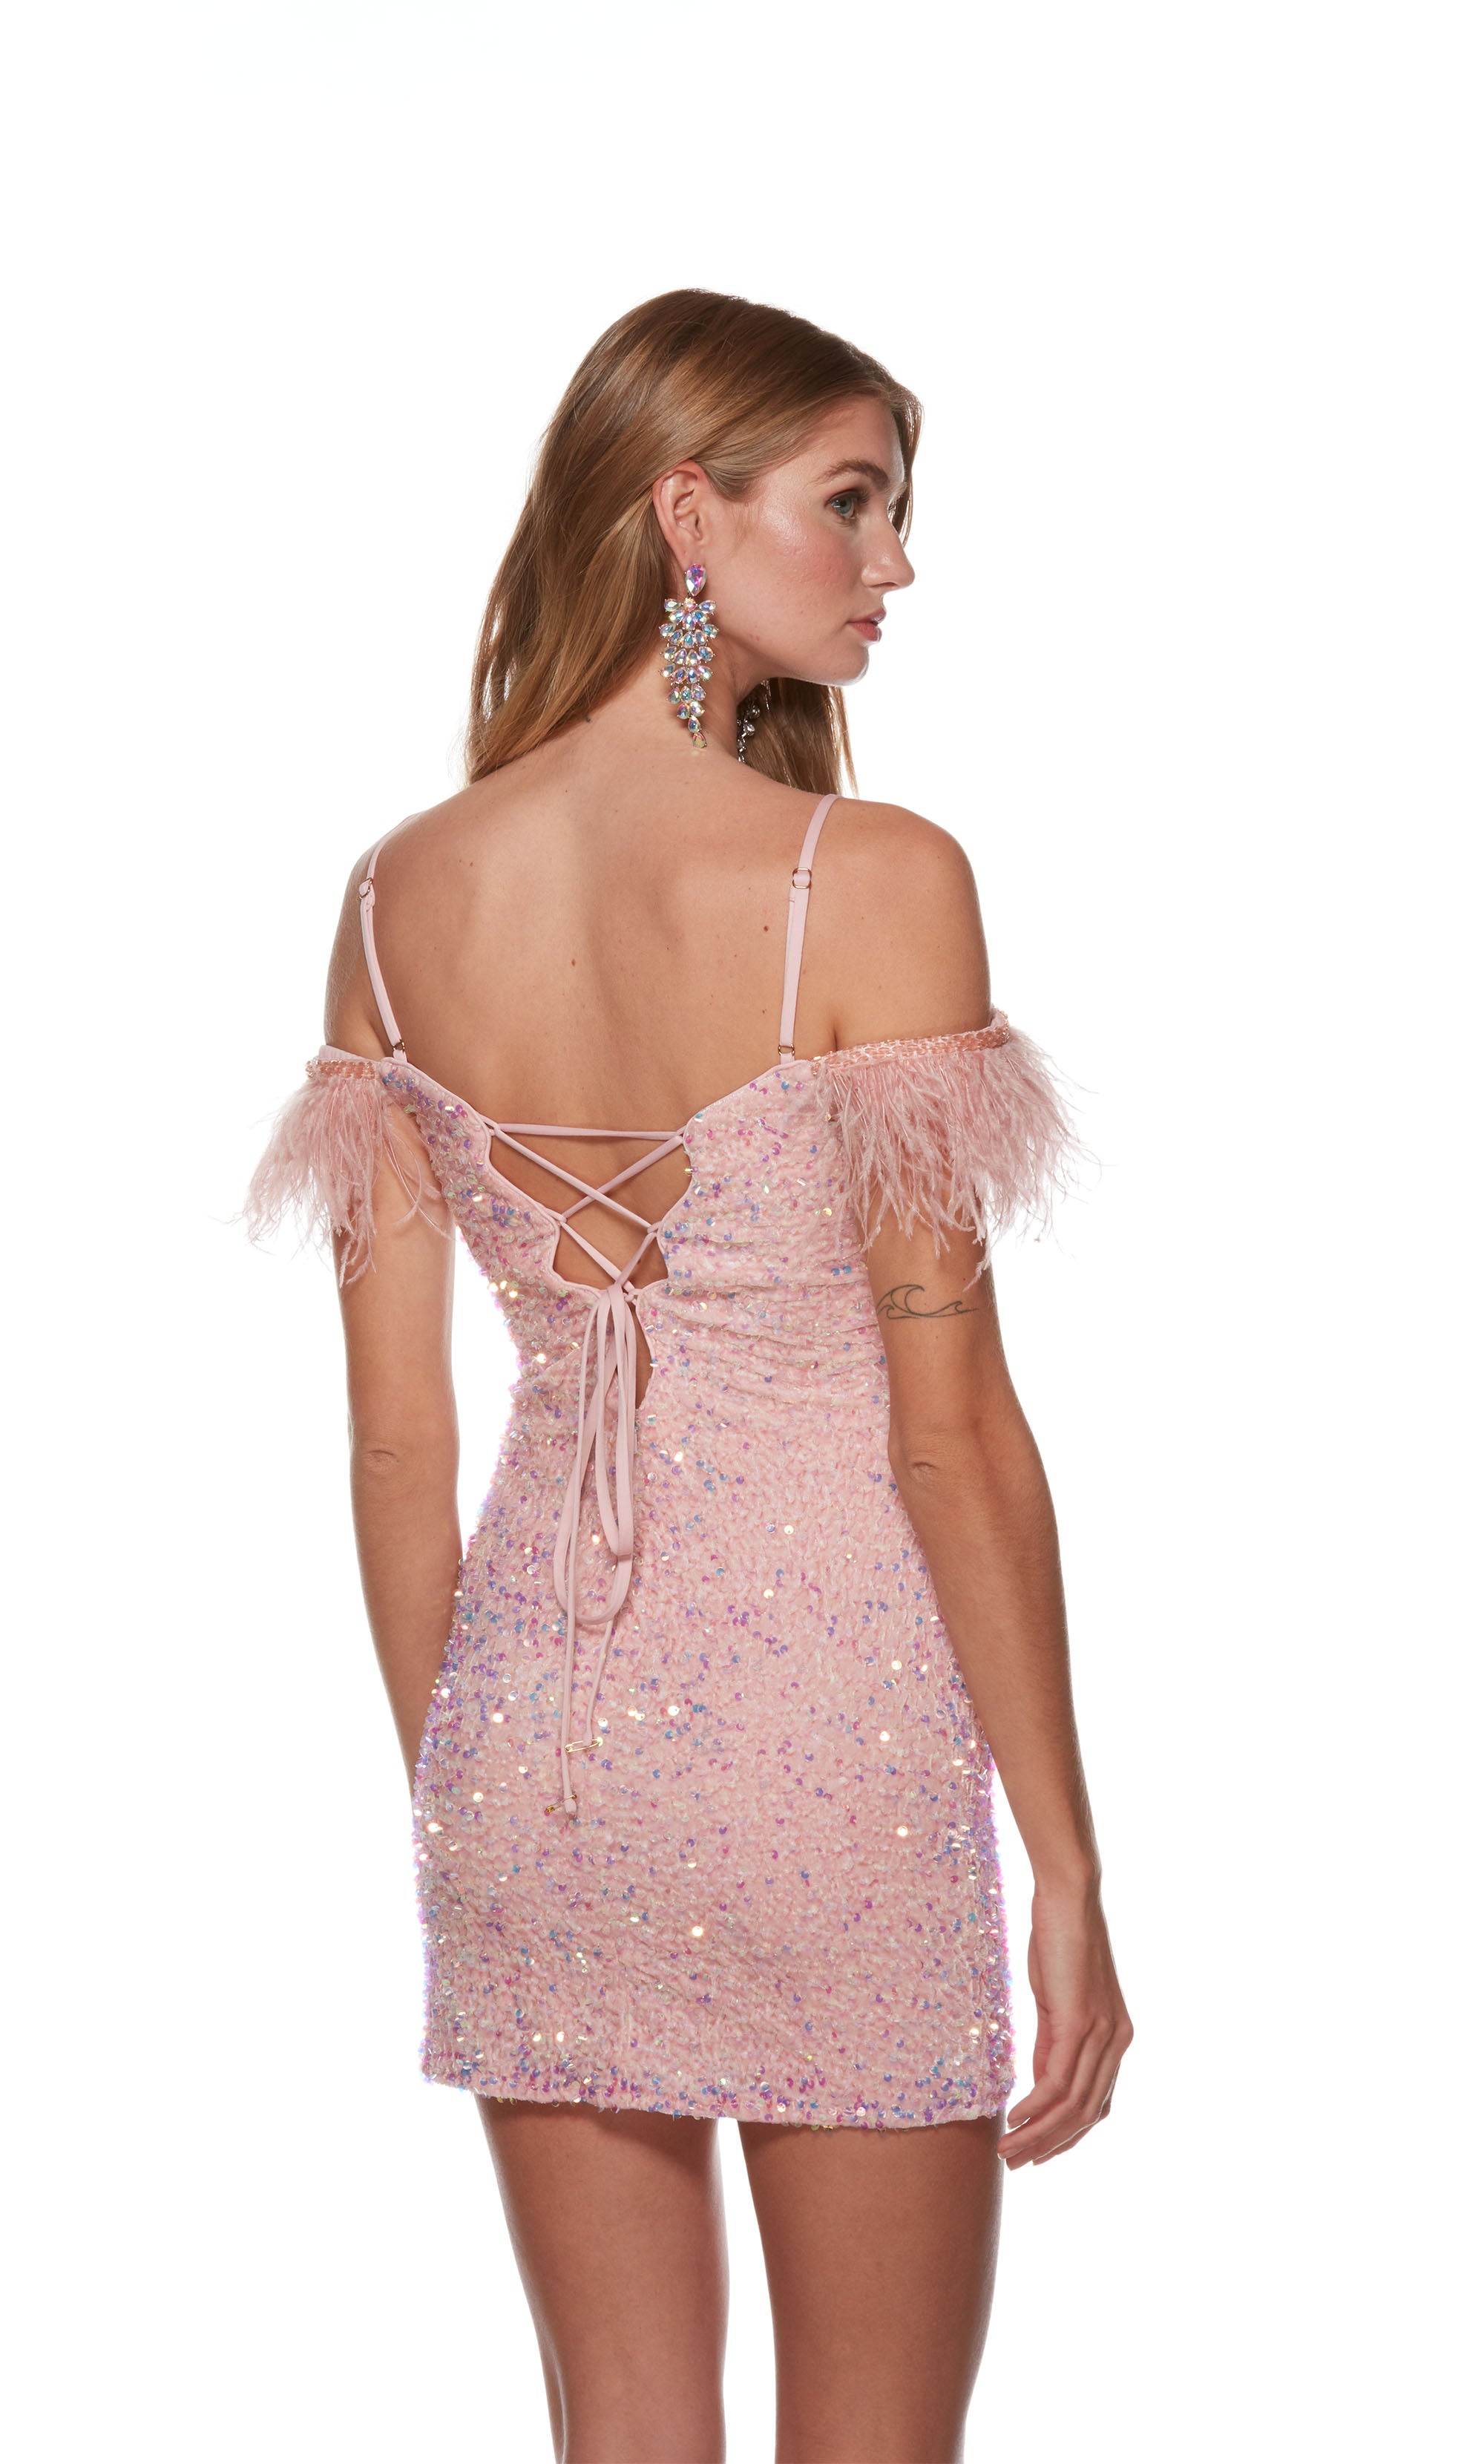 A sweet and sparkly fitted homecoming dress with an off-the-shoulder neckline with adjustable spaghetti straps. The dress highlights feather-trimmed sleeves and a lace-up back for a custom fit.